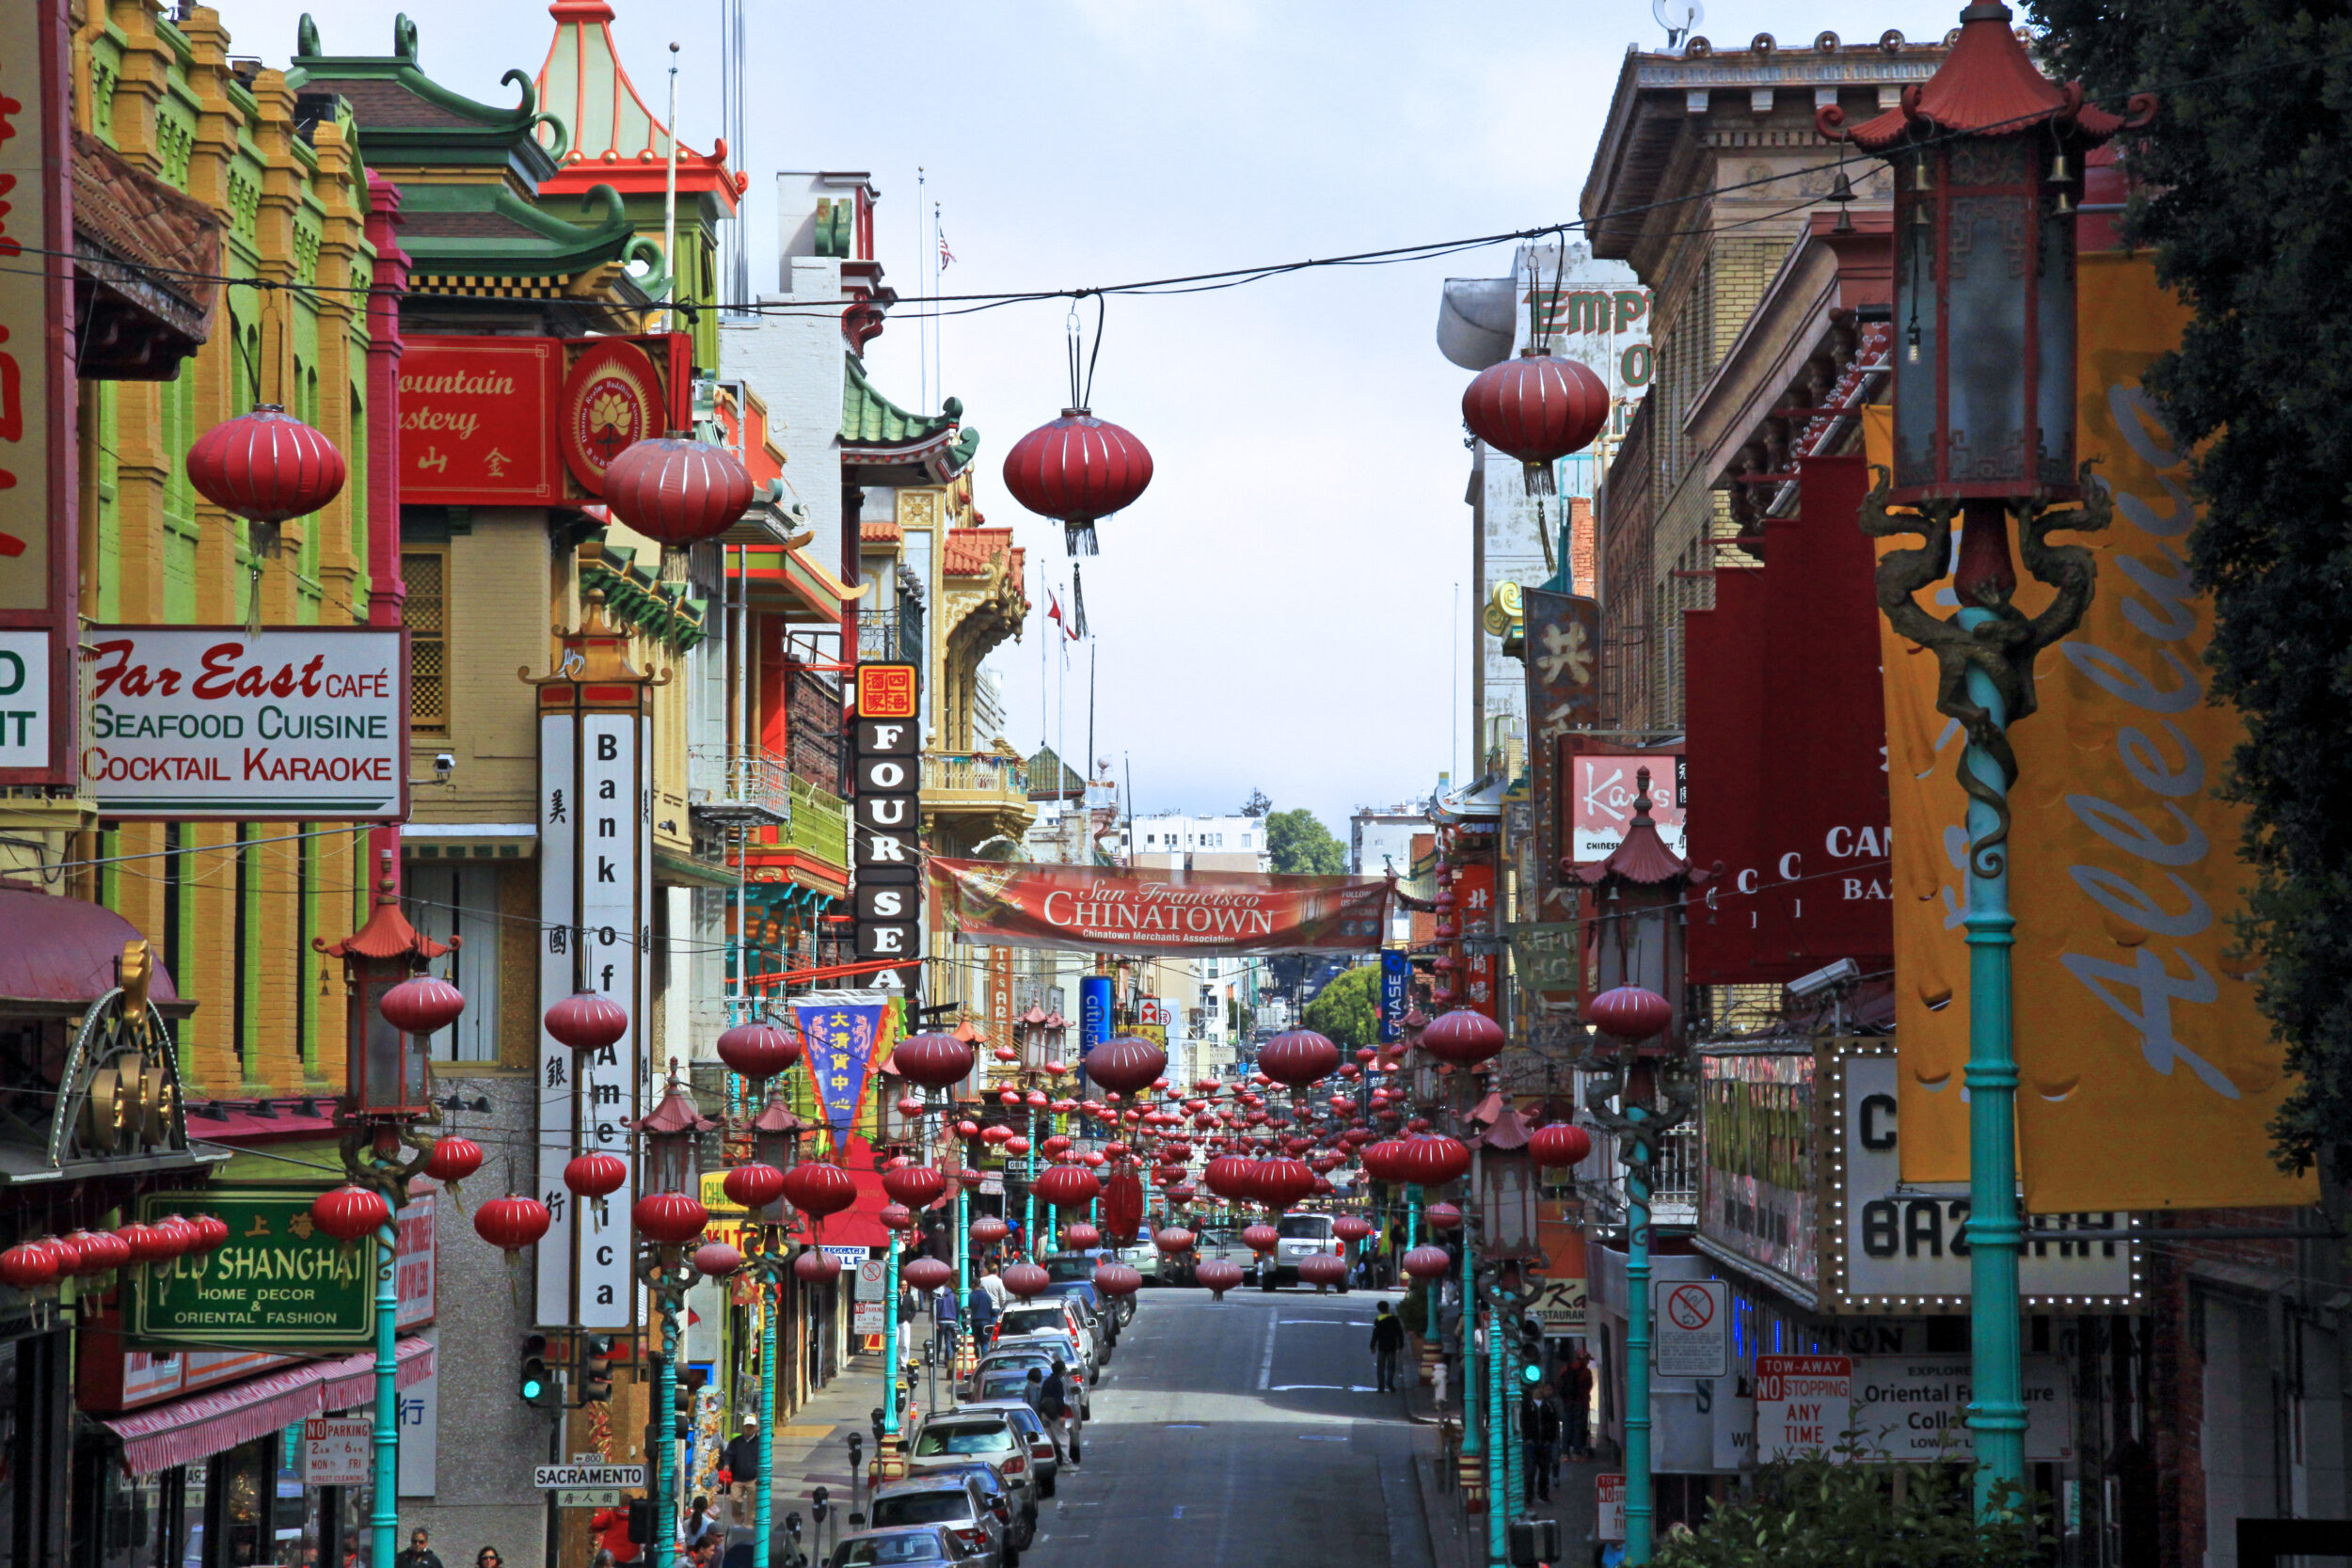 A night market appears set for approval Nov. 11-12 along Grant Avenue in San Francisco's Chinatown neighborhood.